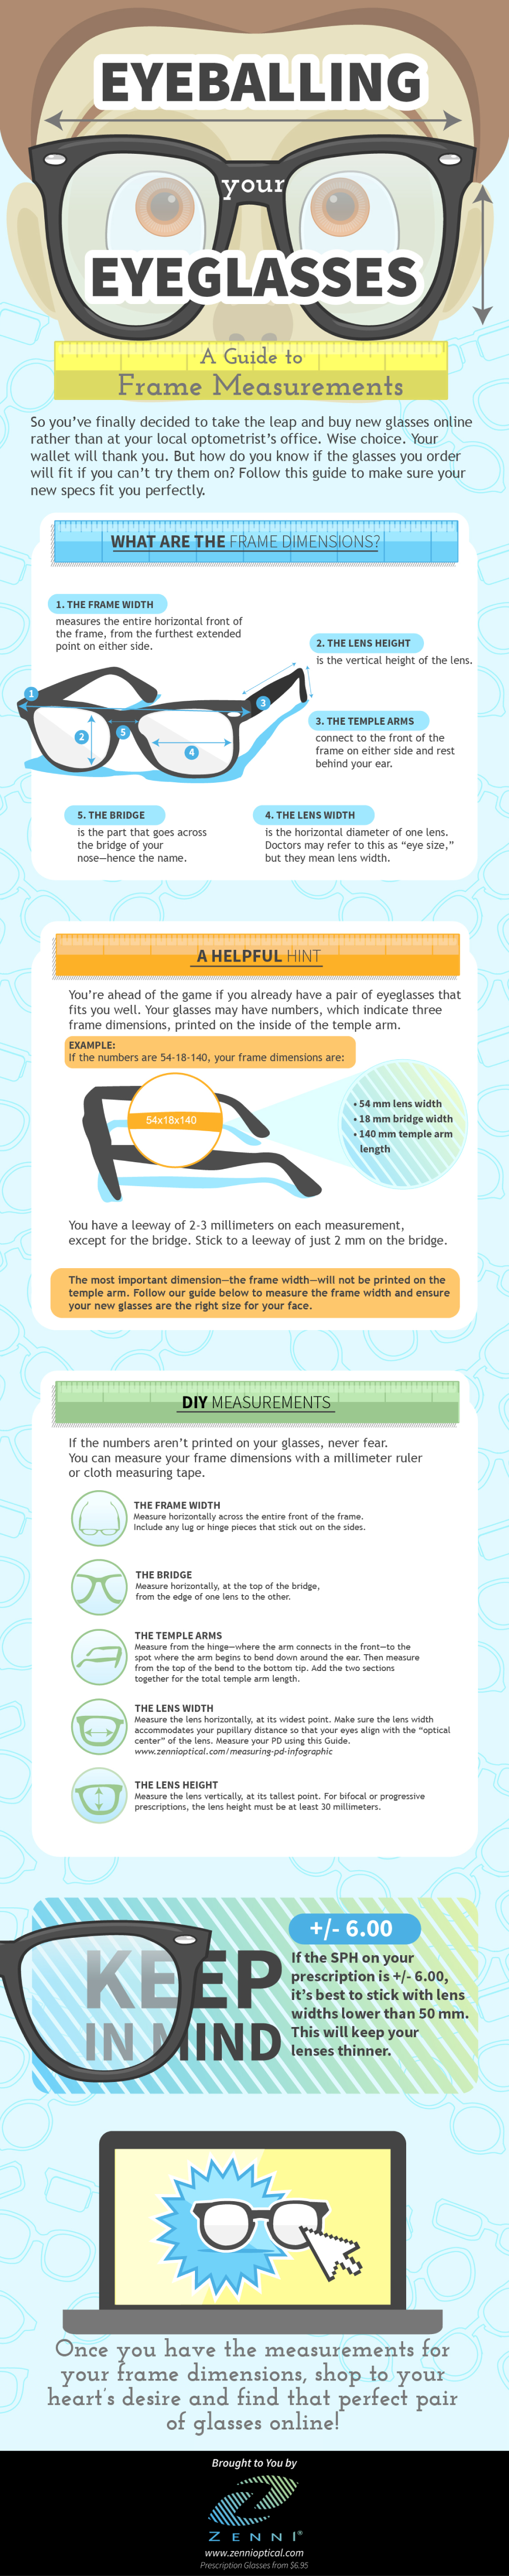 What Are The Best Eyeglasses For Your Face Shape? - Infographic